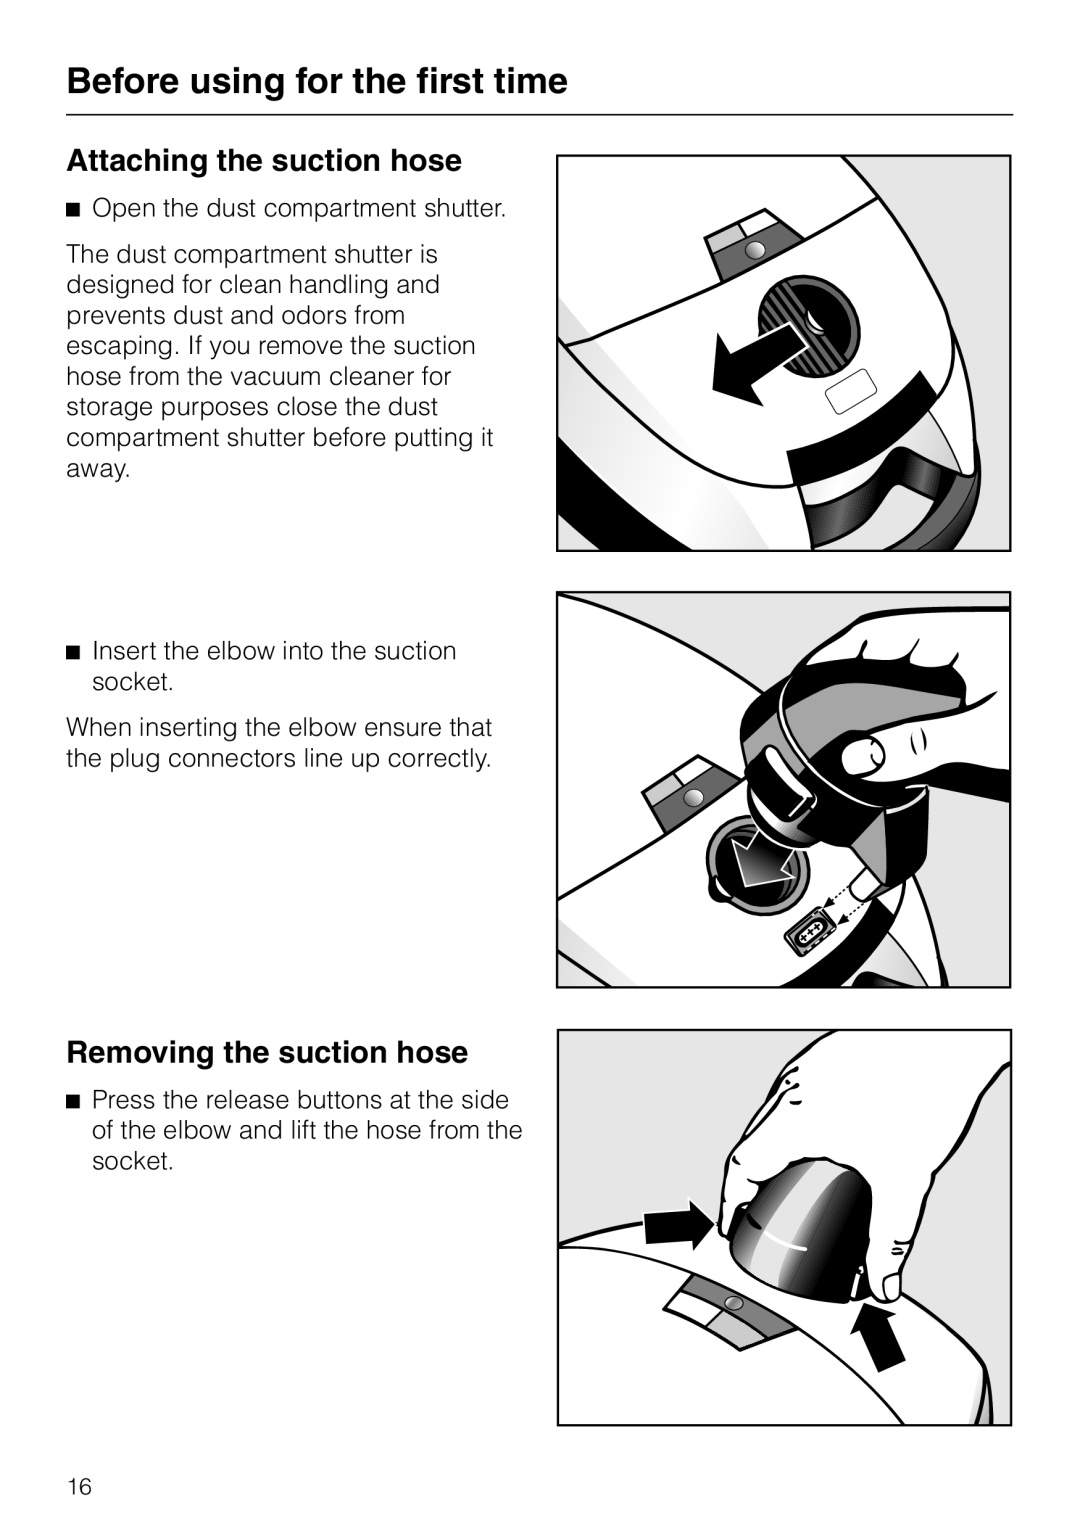 Miele S 558 manual Before using for the first time, Attaching the suction hose, Removing the suction hose 